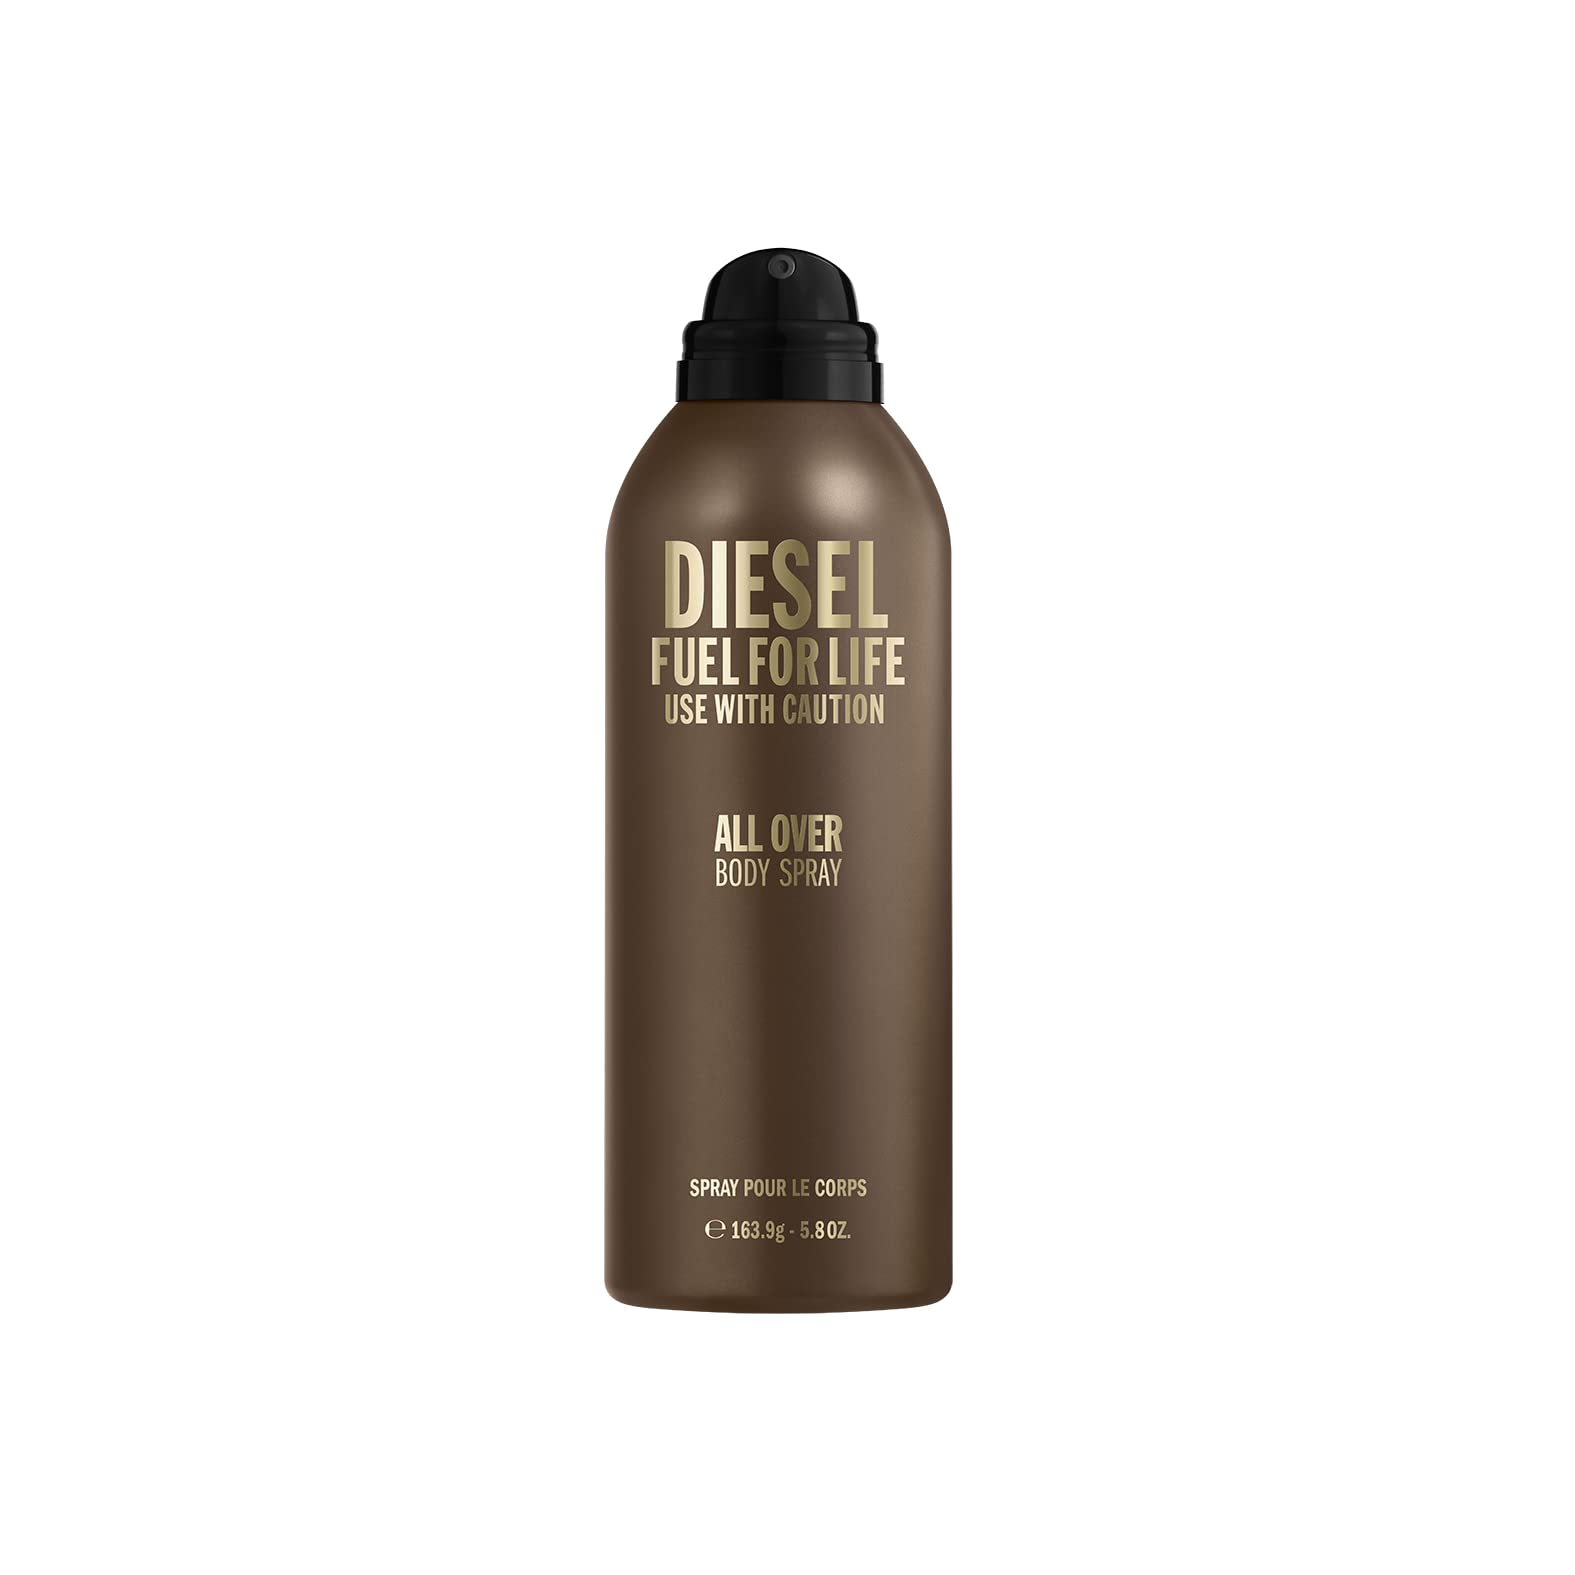 DIESEL FUEL FOR LIFE DEO 200ML